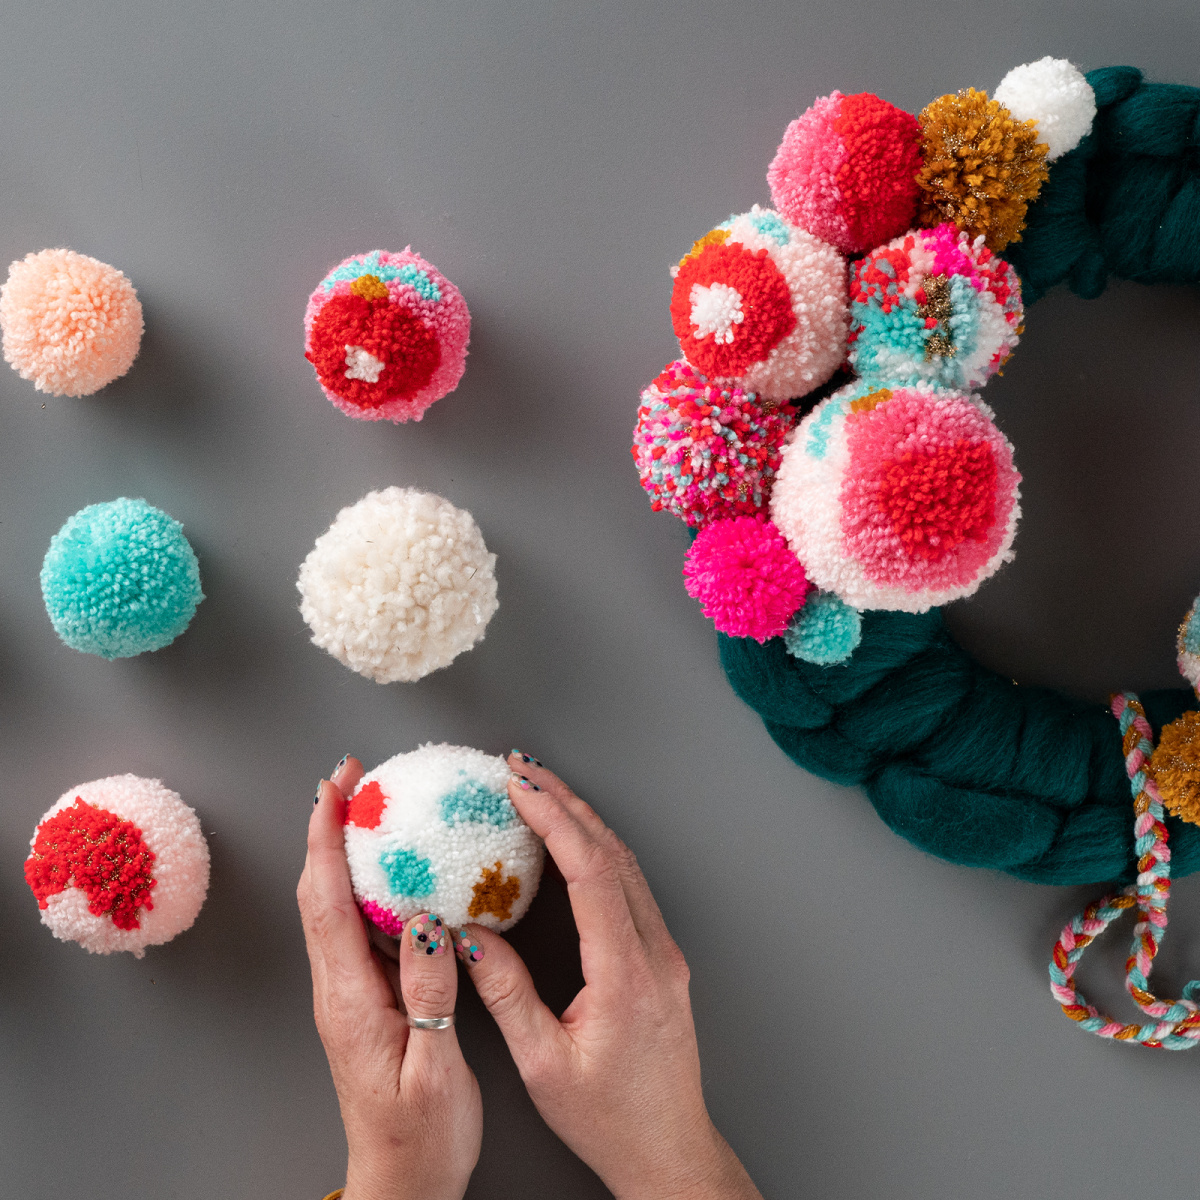 How to Make Multicolor Pom Poms - The Woolery